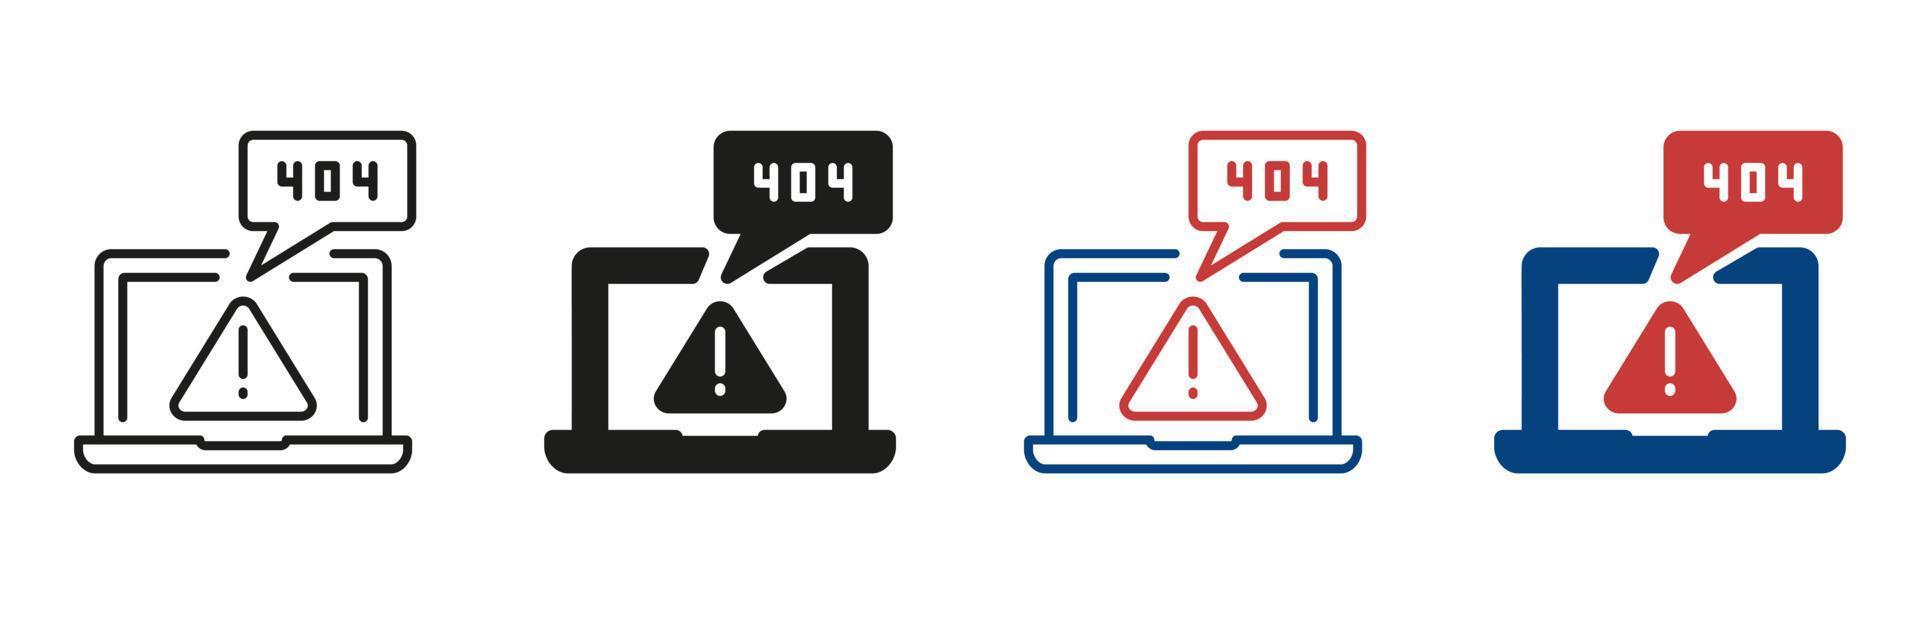 Trouble With Internet Connection. File Not Found and Broken Page Symbol Collection. Page Not Found Line and Silhouette Icon Set. 404 Error Page. Laptop with Warning Sign. Isolated Vector illustration.